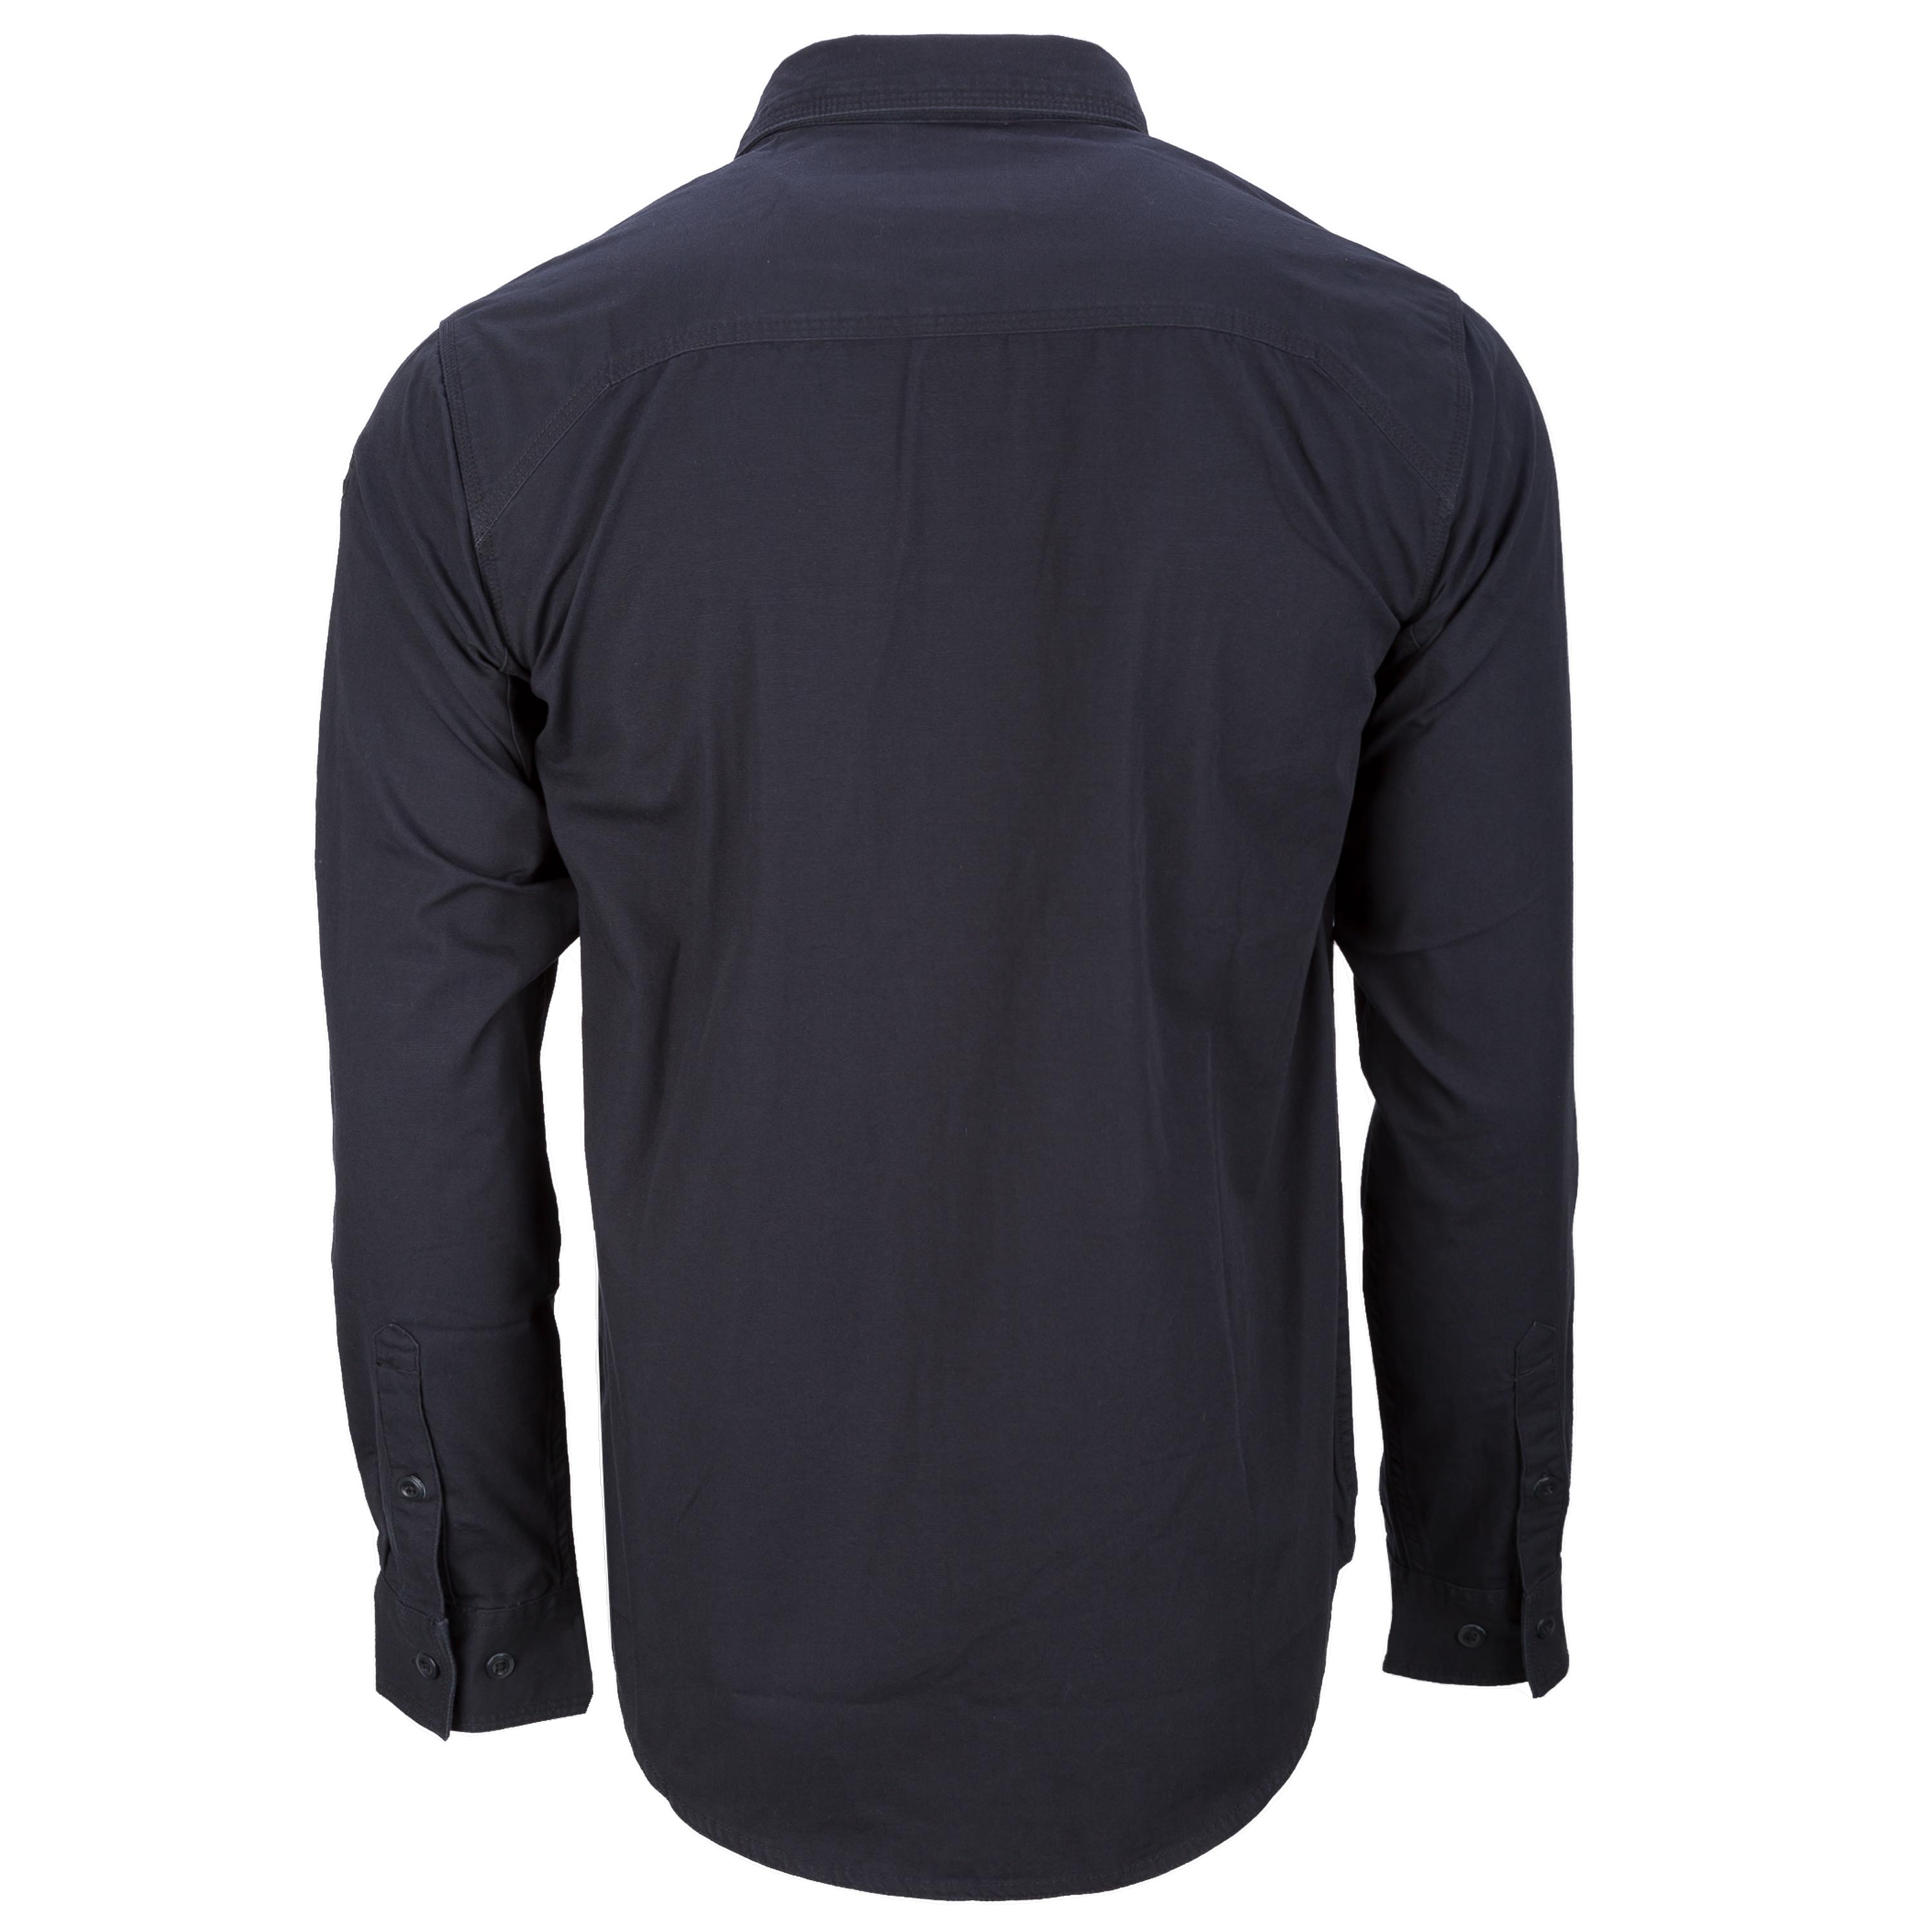 Purchase the 5.11 Expedition Long Sleeve Shirt stone wash black